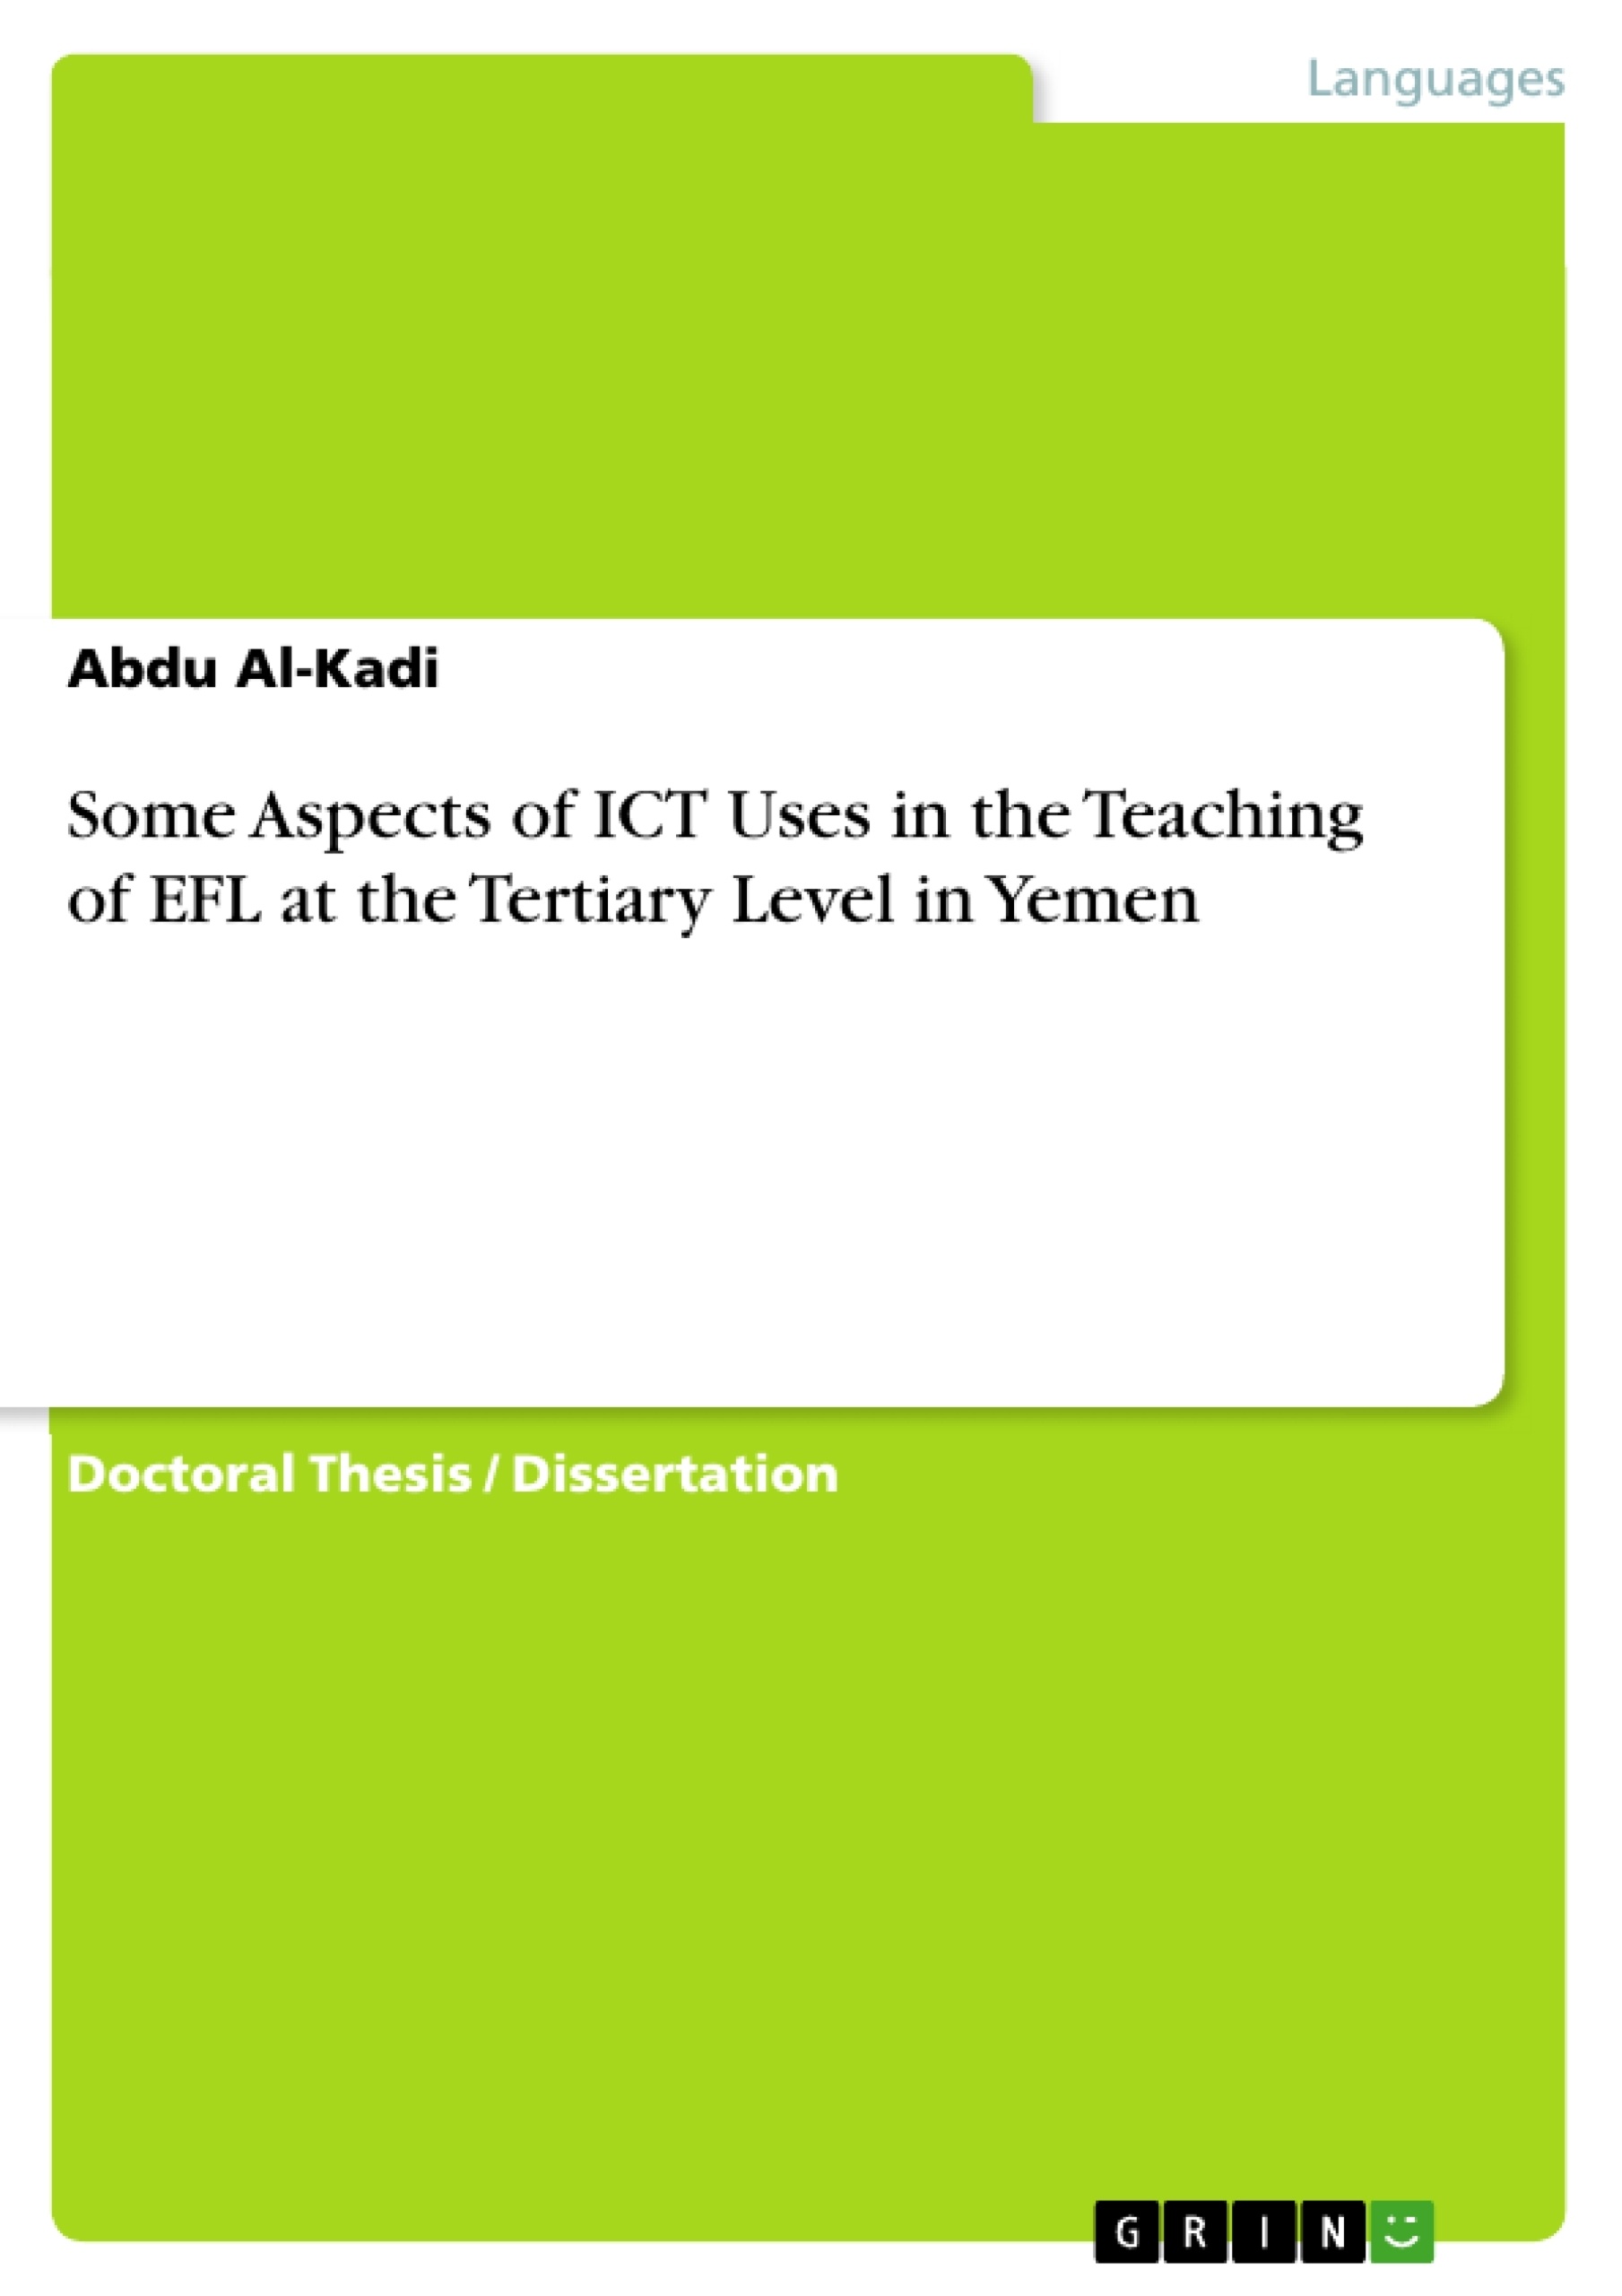 Title: Some Aspects of ICT Uses in the Teaching of EFL at the Tertiary Level in Yemen